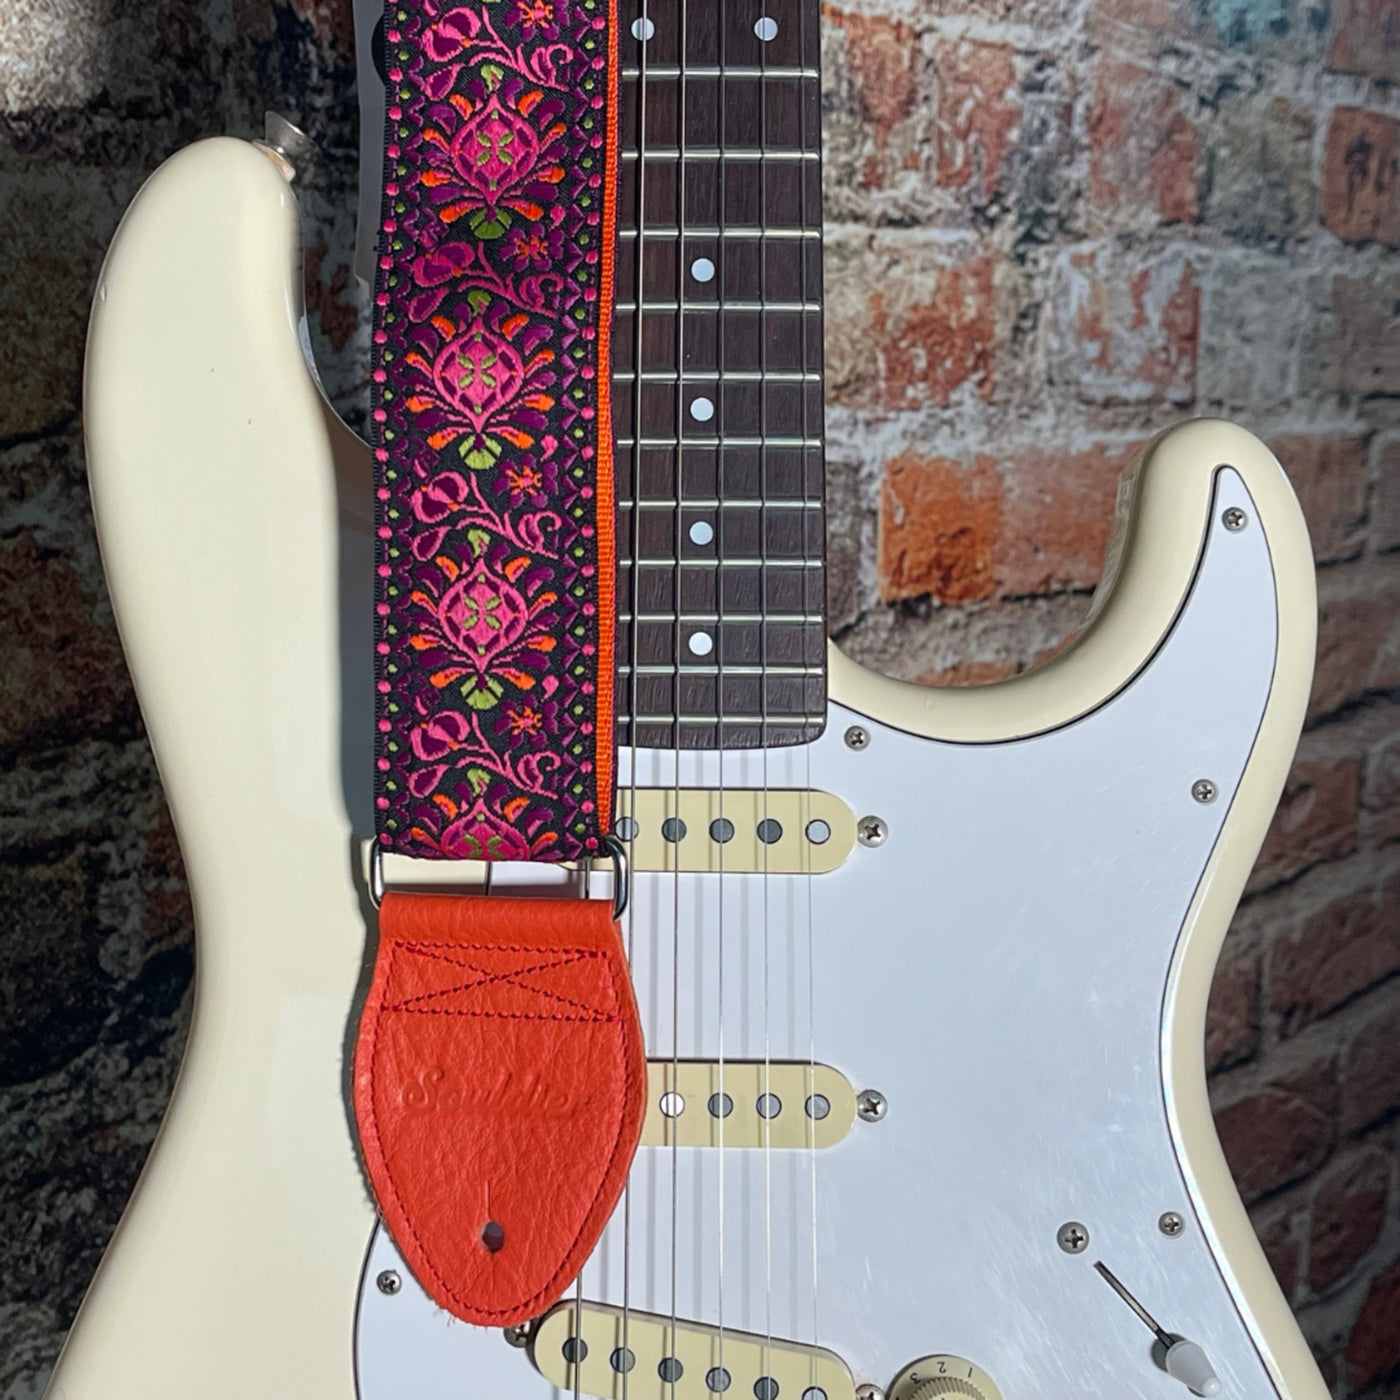 Souldier GS0120OR02OR - Handmade Seatbelt Guitar Strap for Bass, Electric or Acoustic Guitar, 2 Inches Wide and Adjustable Length from 30" to 63"  Made in the USA, Hendrix,  Magenta